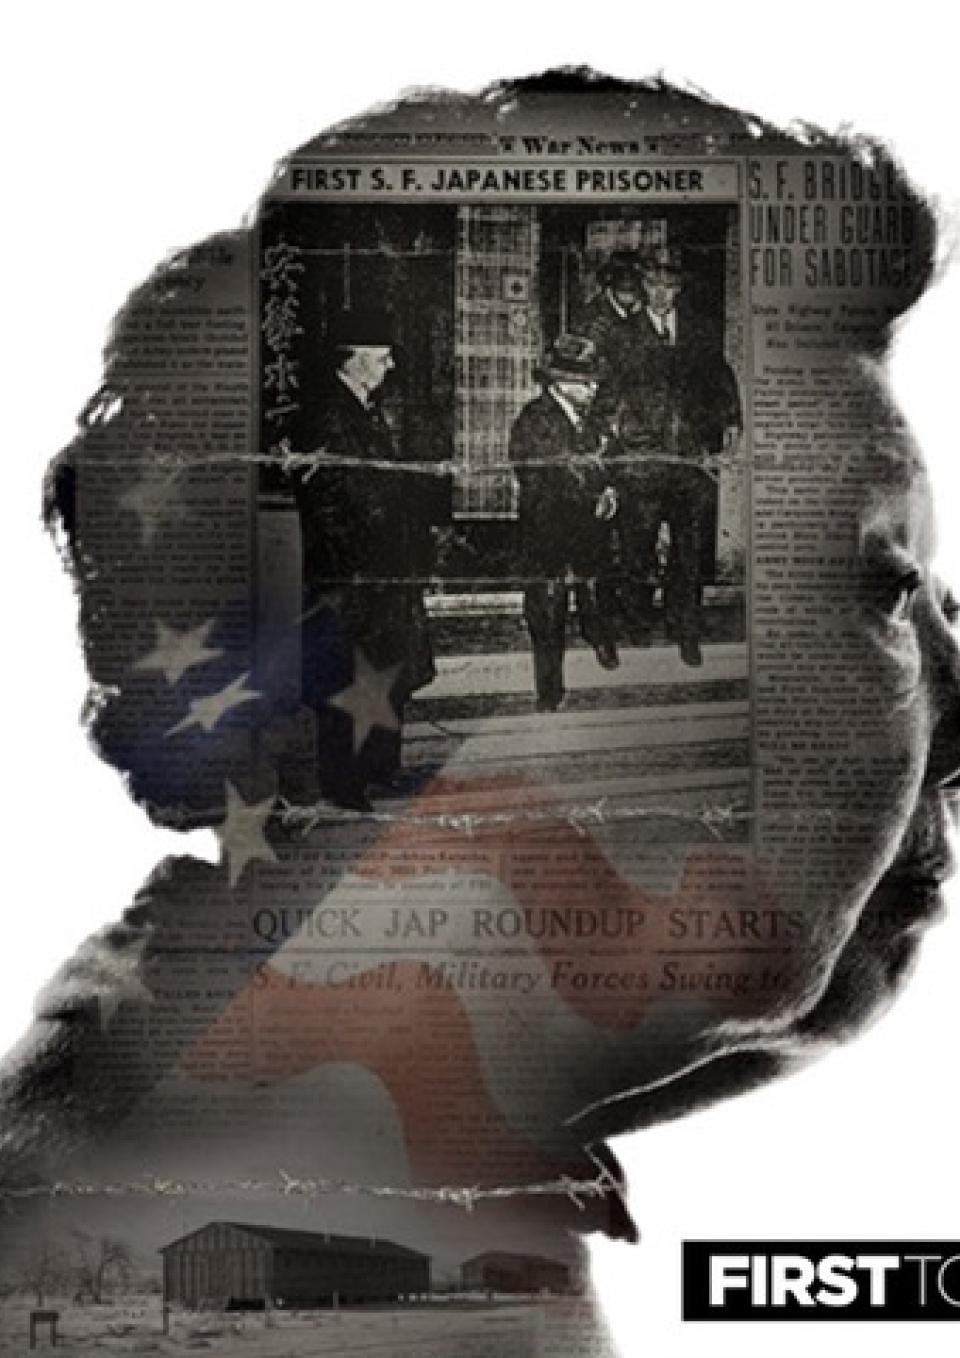 A composite image of a black and white photo of an elder Japanese woman's face with a vintage newspaper and an American flag superimposed on her profile. The newspaper says First S.F. Japanese Prisoner with a photo of a Japanese man escorted out of a building by white men in suits. Black and white text on the right reads First to Go.